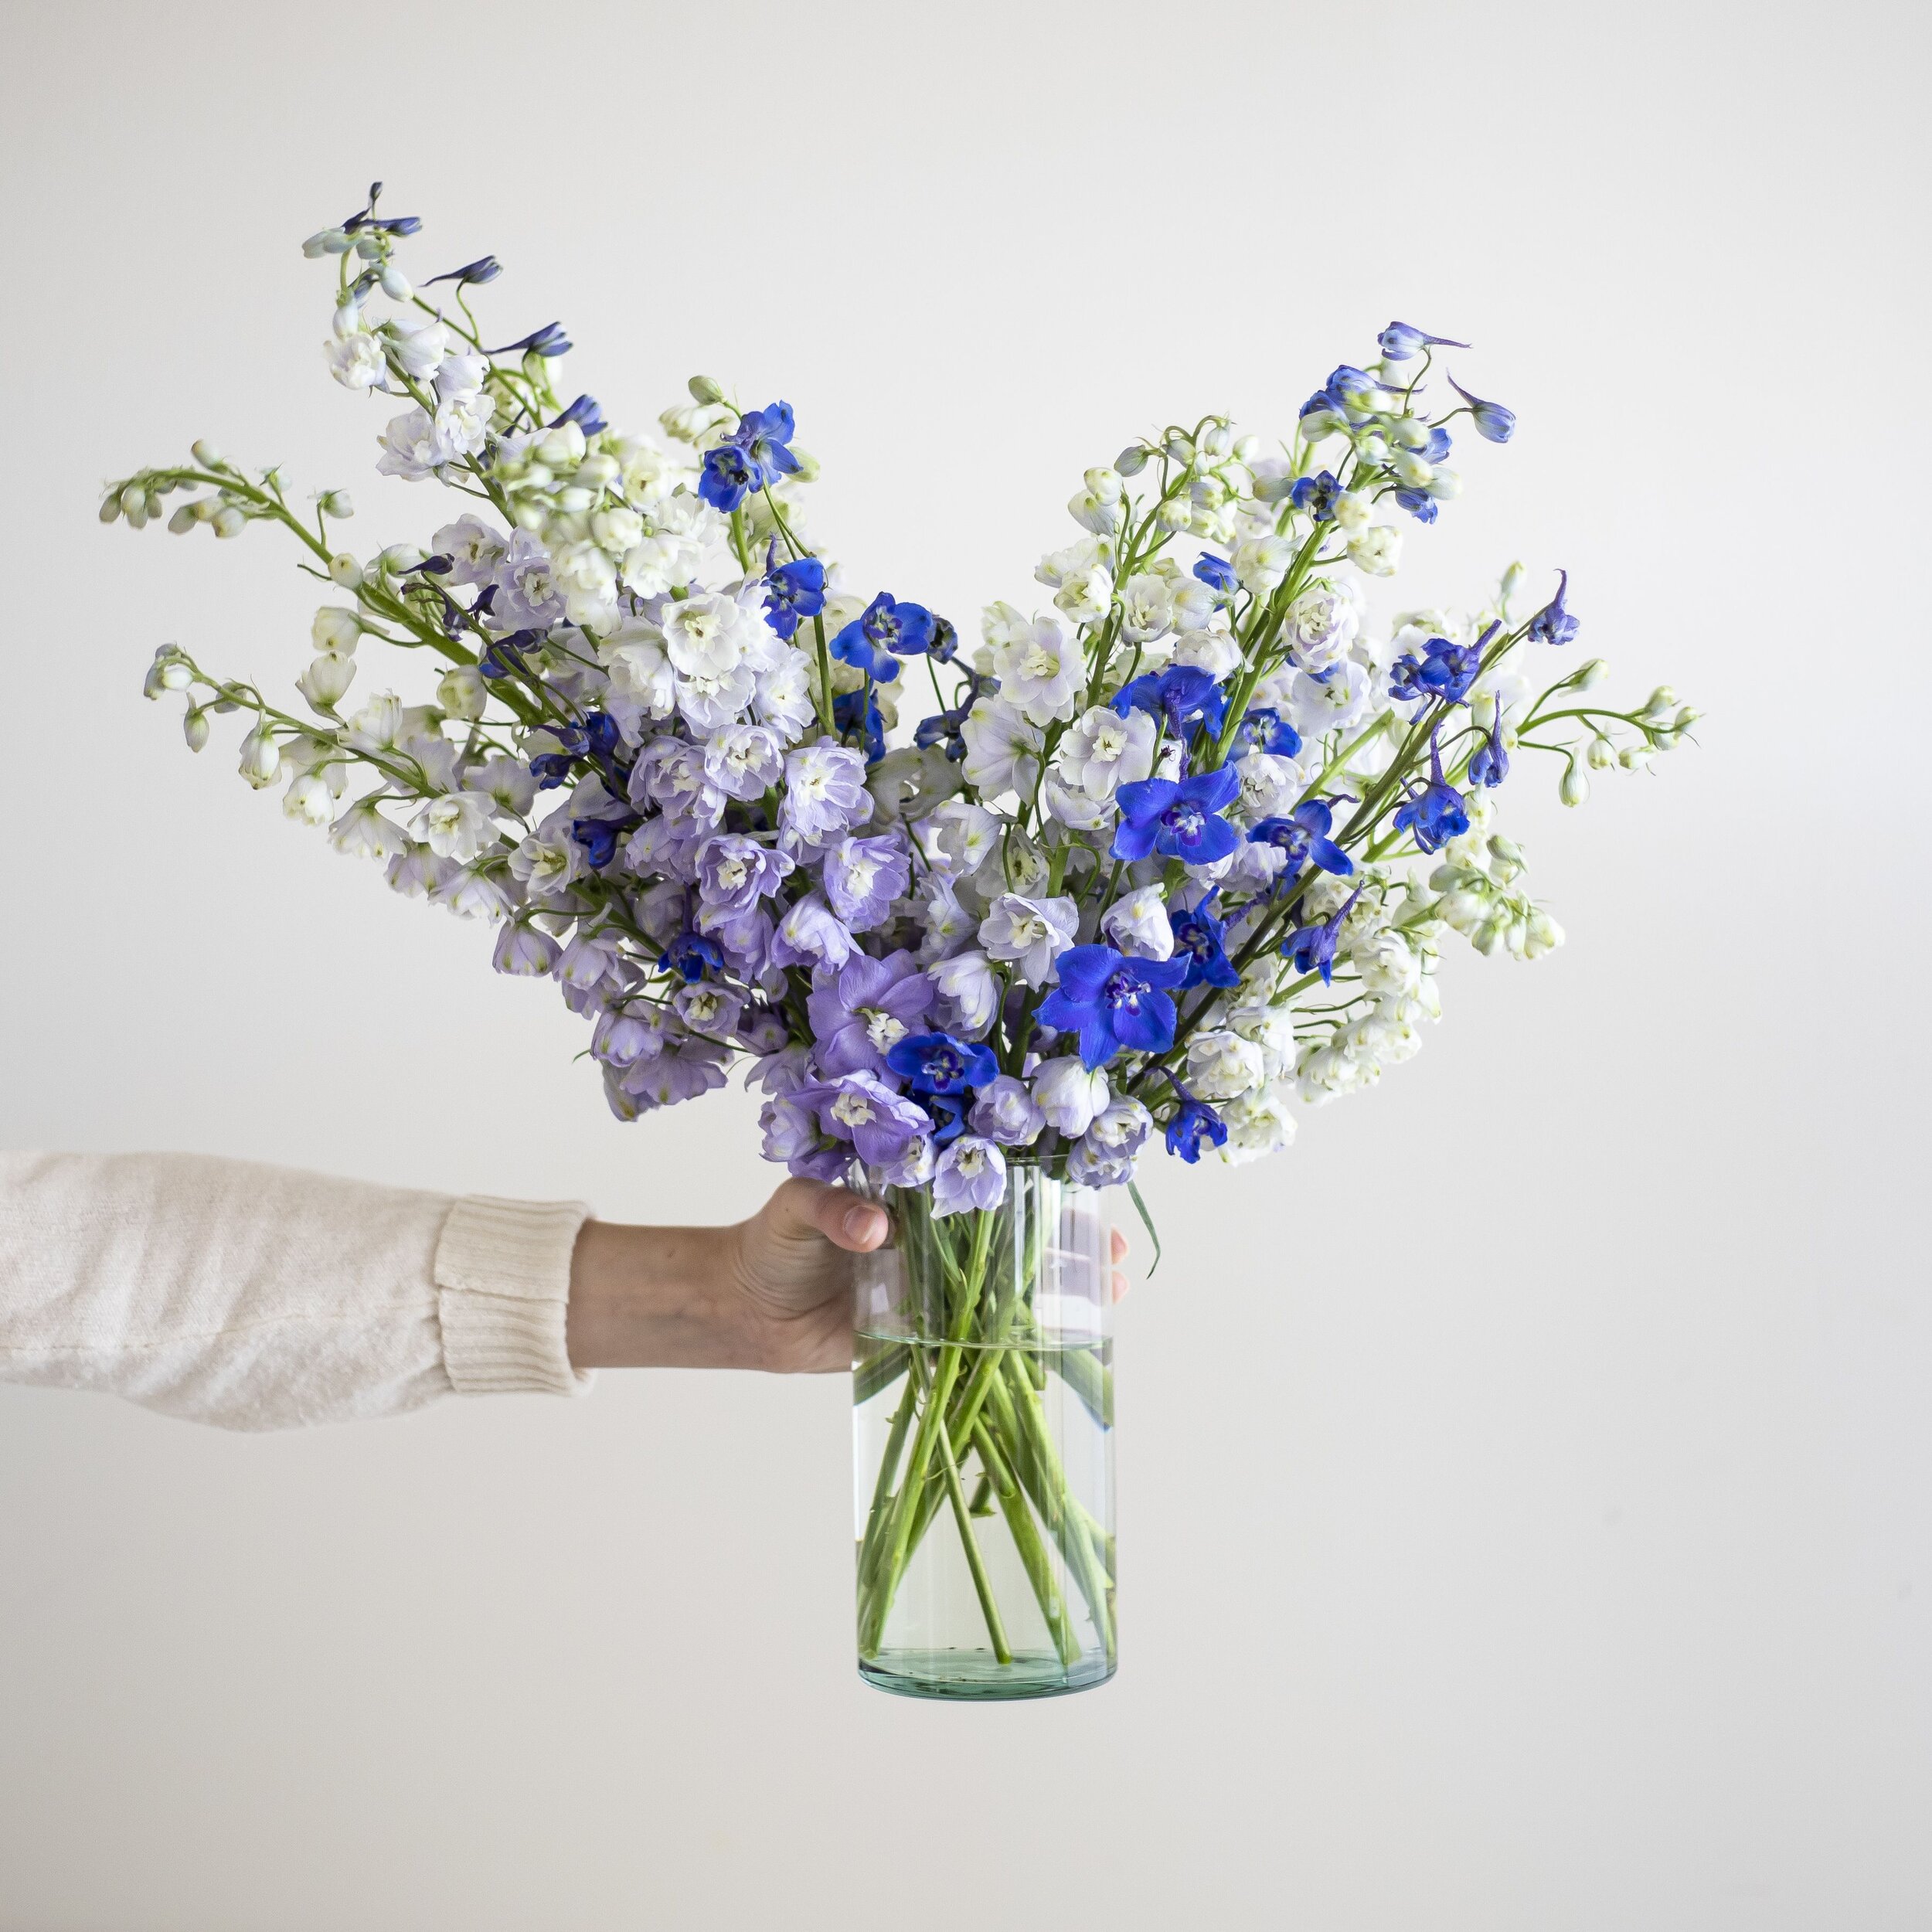 Light purple, purple, and bold blue stems of delphinium in a glass vase with water being held up in front of a white background